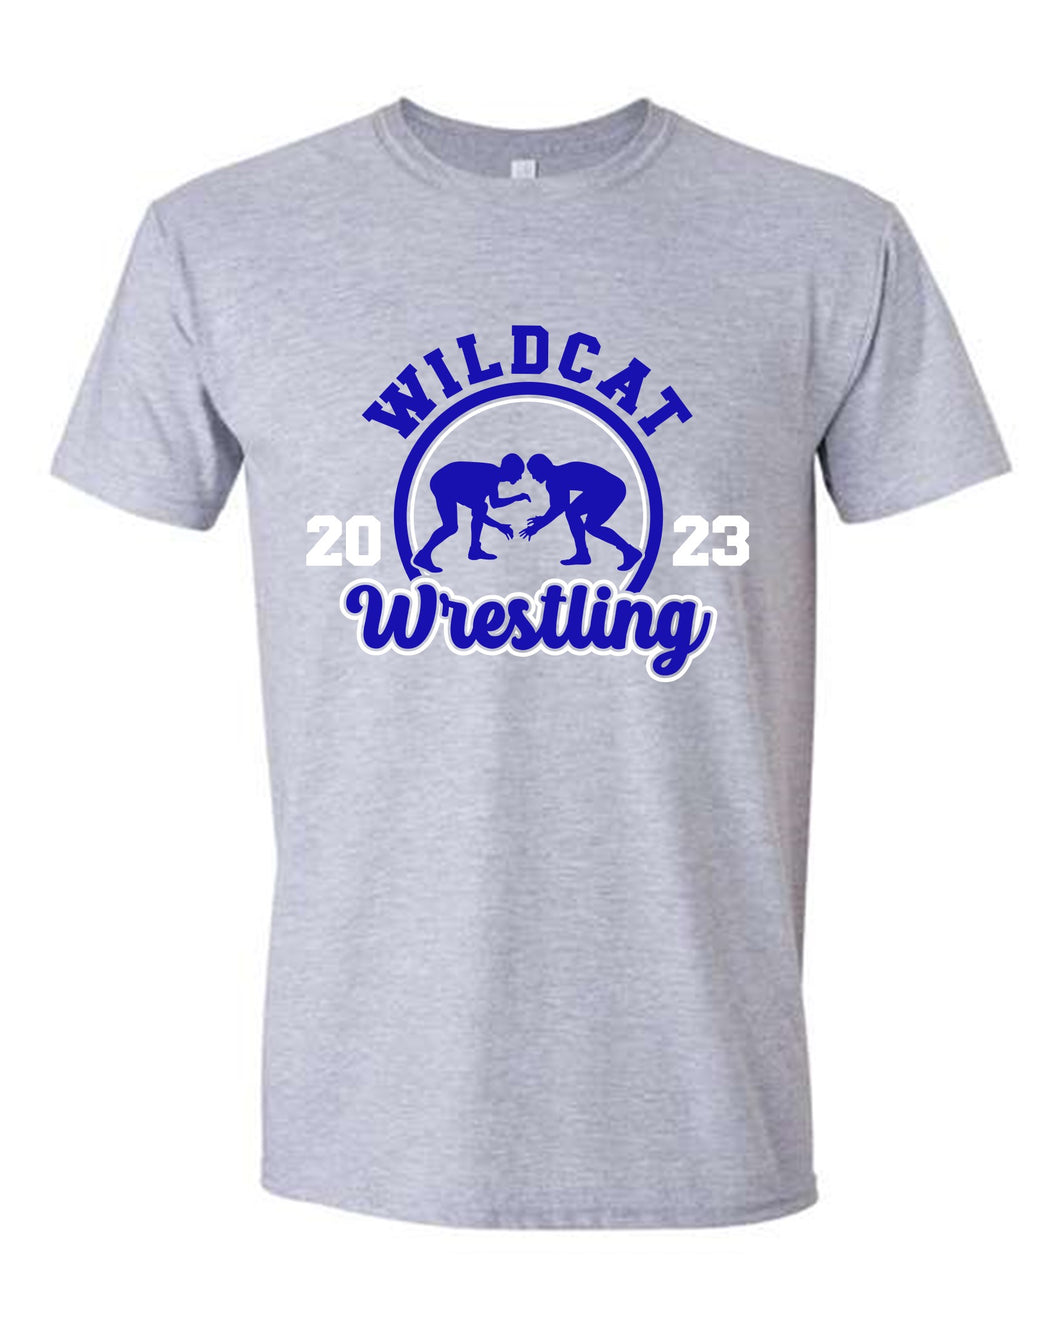 Central Mountain Wildcats Wrestling Style 5 - Click for Additional Styles (Youth and Adult)